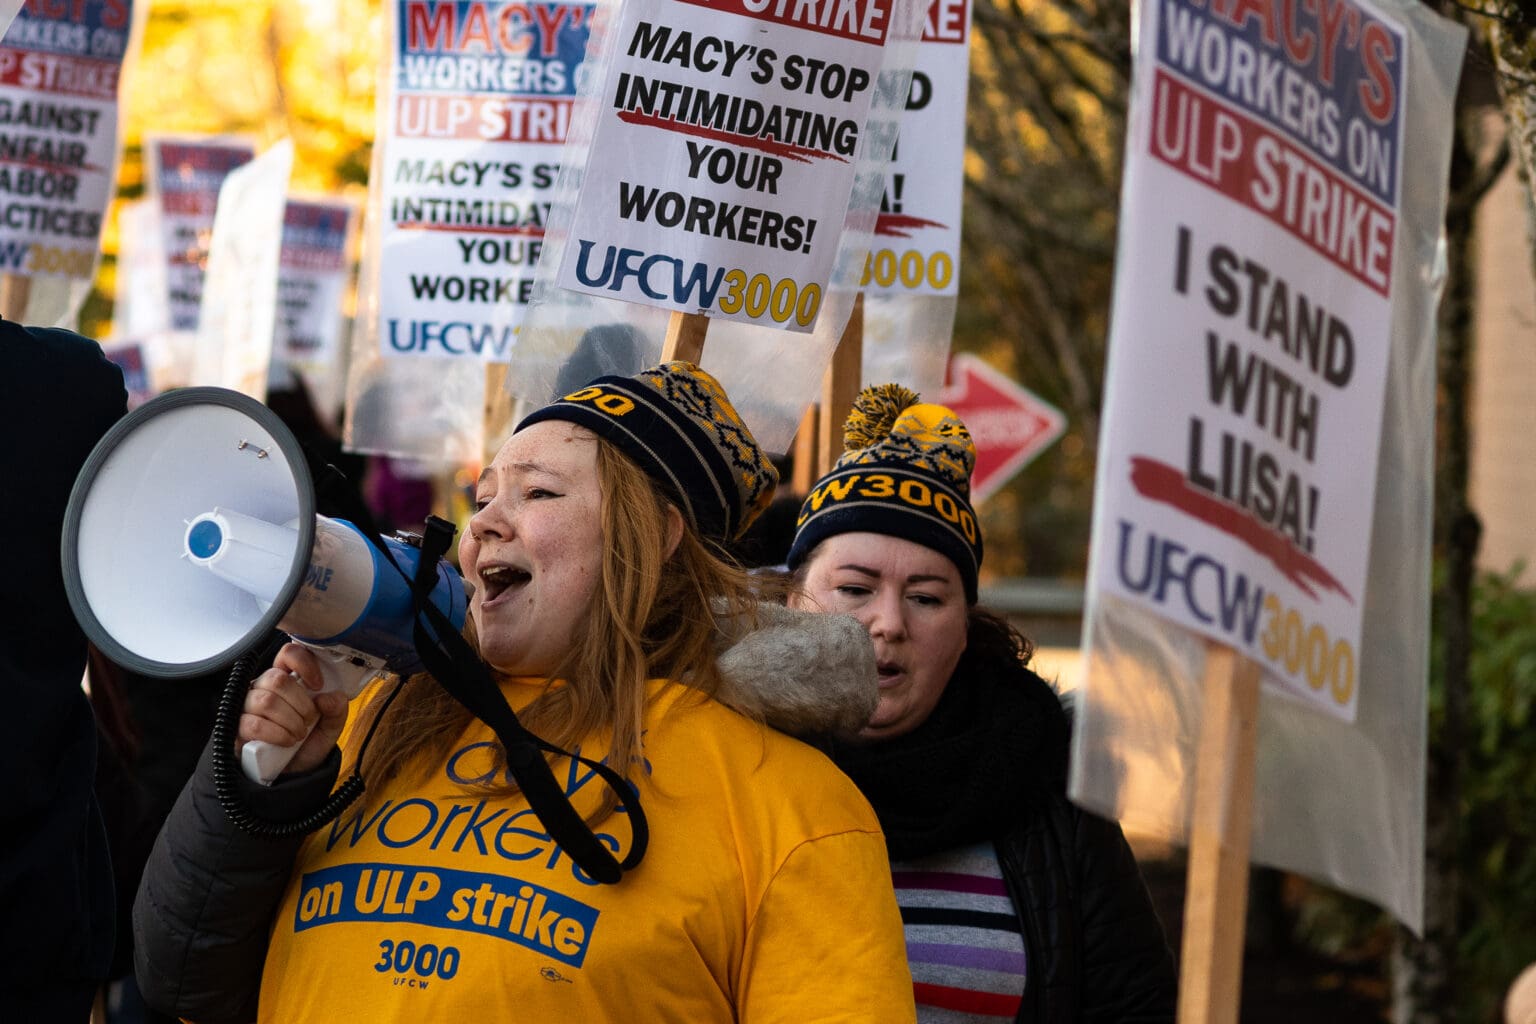 Samantha Wilson, a Macy's union employee, chants through a megaphone with many protestors chanting along behind her with signs supporting her strike.